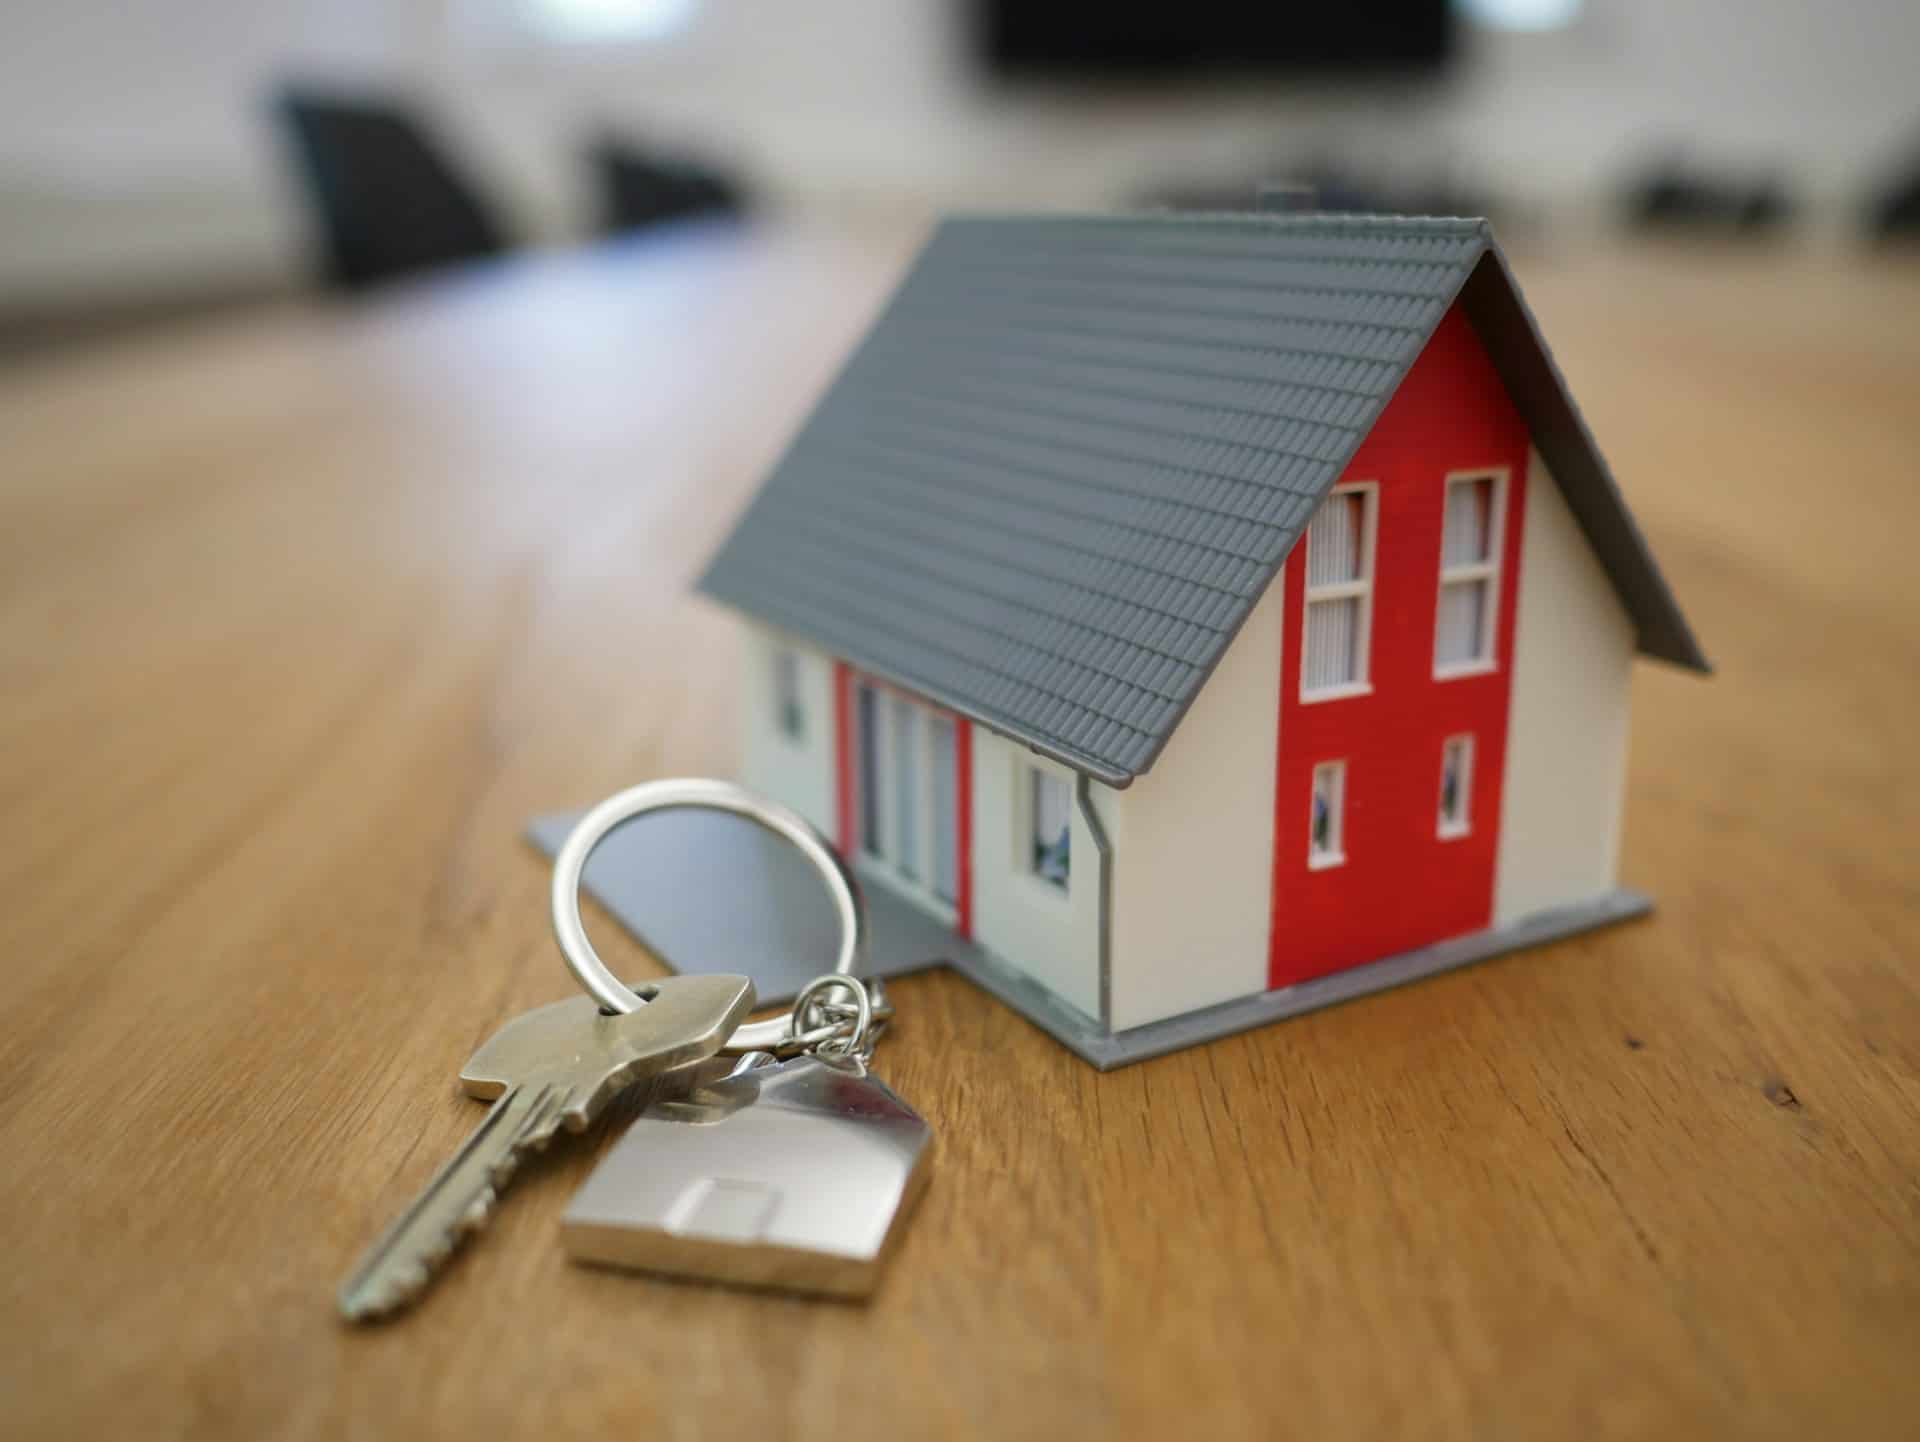 model of a house and set of keys on table